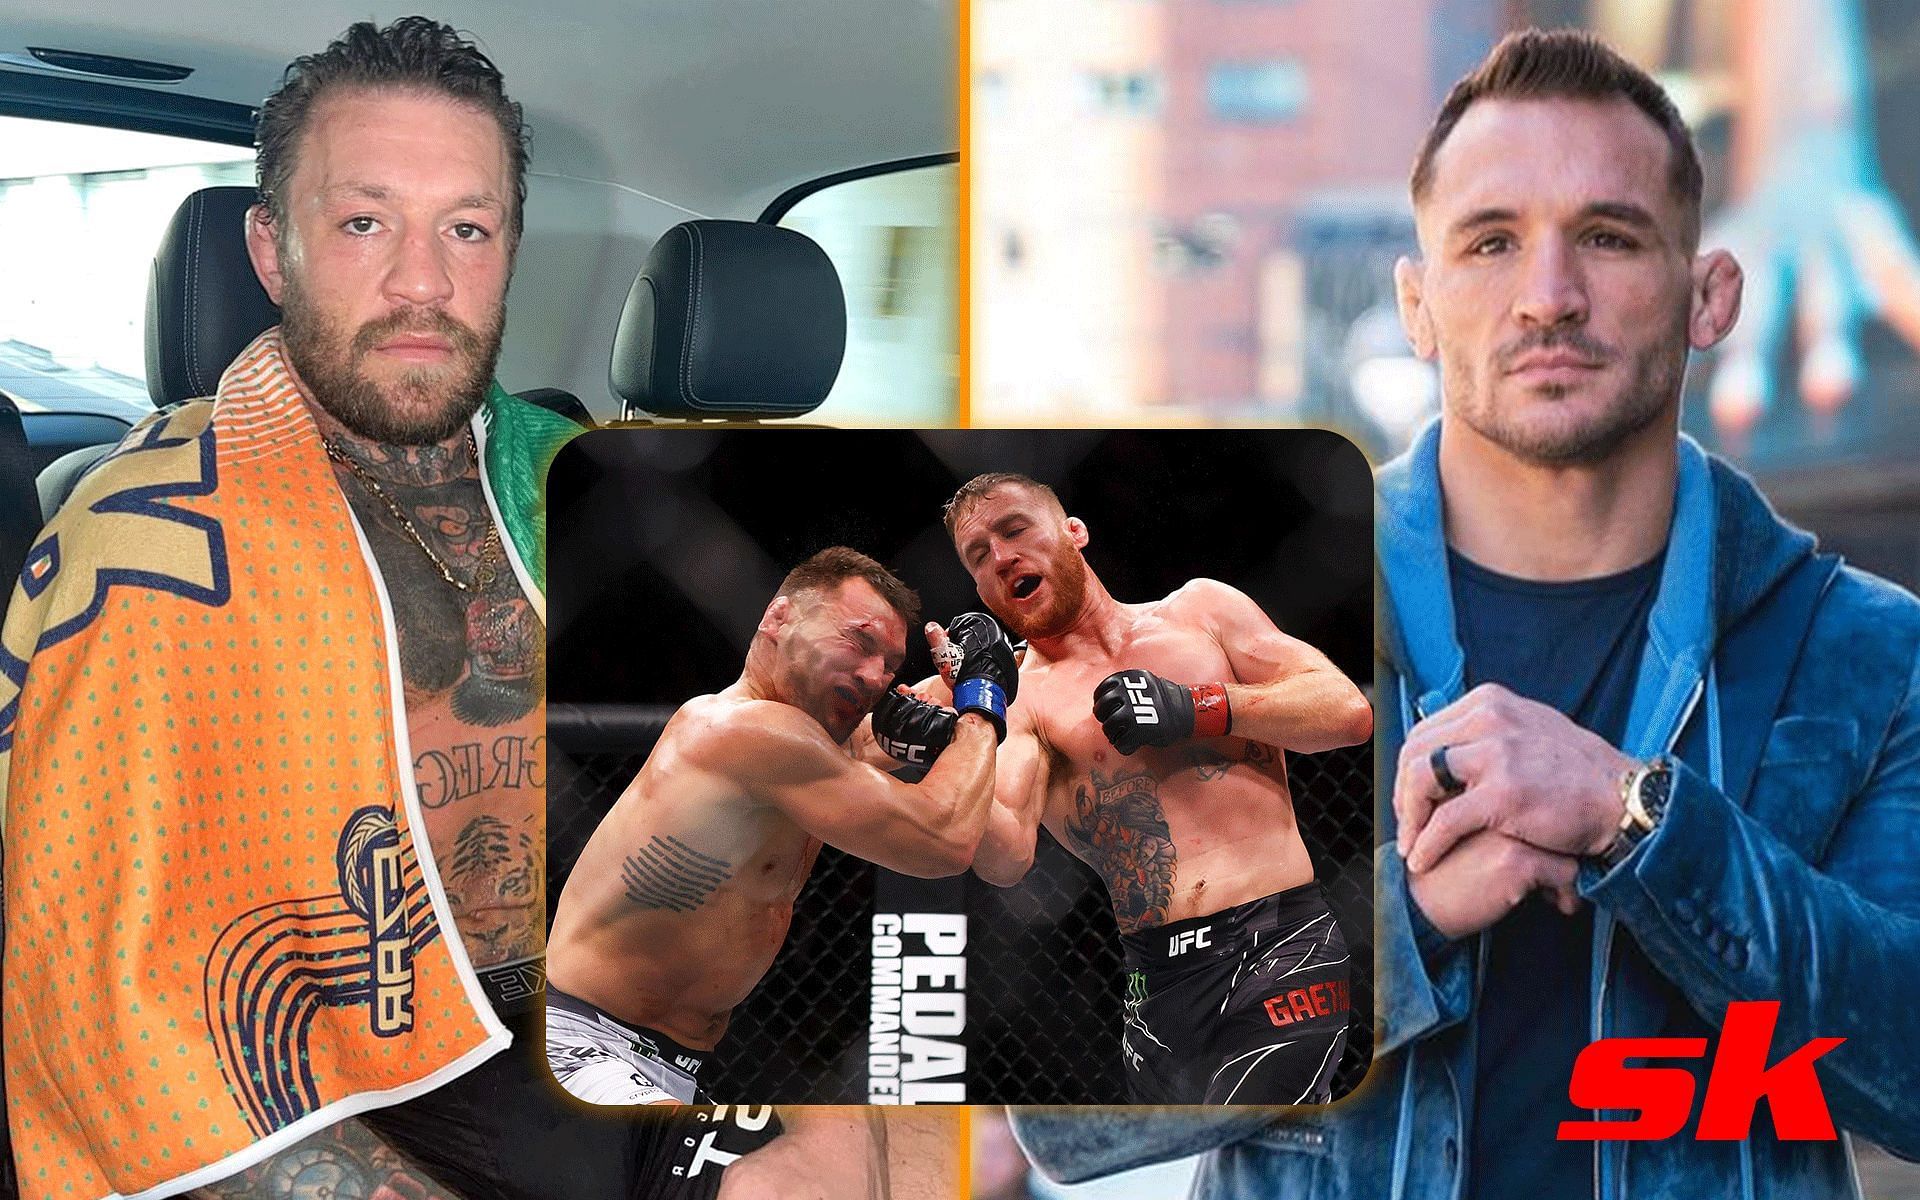 Images via: [@@GeorgeMMA_ on X, and @mikechandlermma and @thenotoriousmma on Instagram]